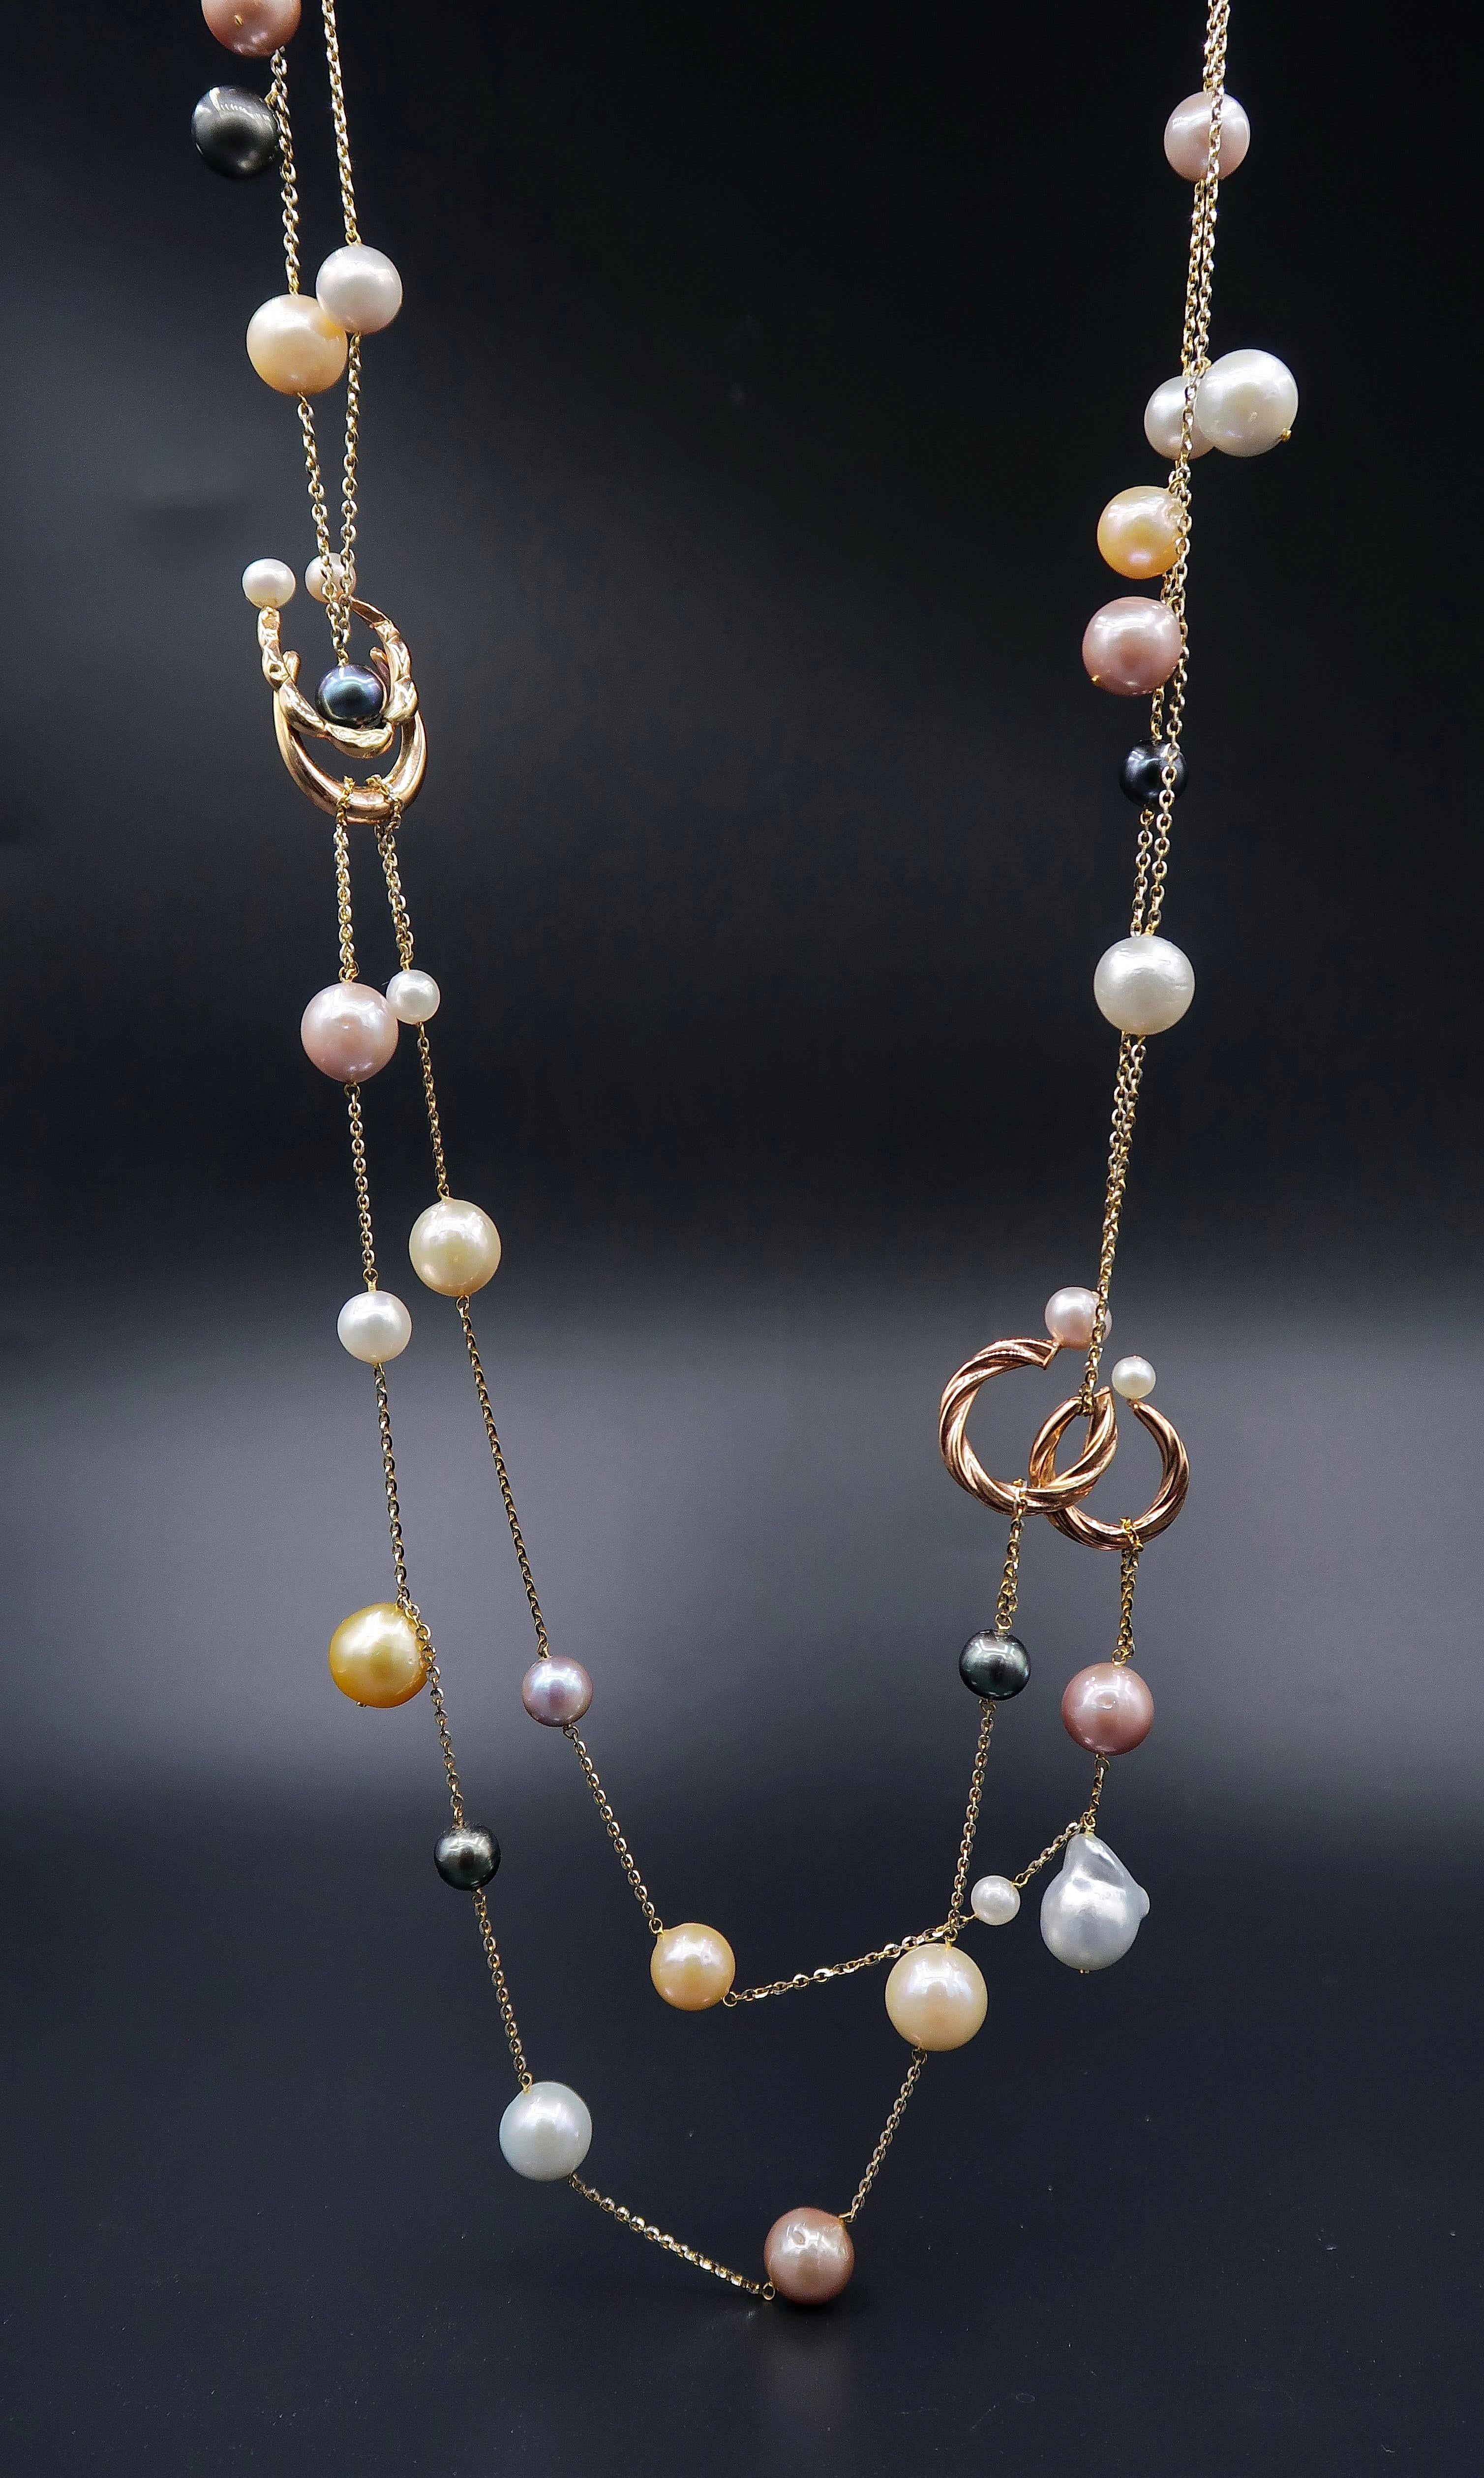 Double Layer Multicolour Pearl and 18 Karat White and Yellow Gold Chain Necklace

Gold: 18K 24.60g.
Pearls: Approx. 6-12mm. 38pcs.
